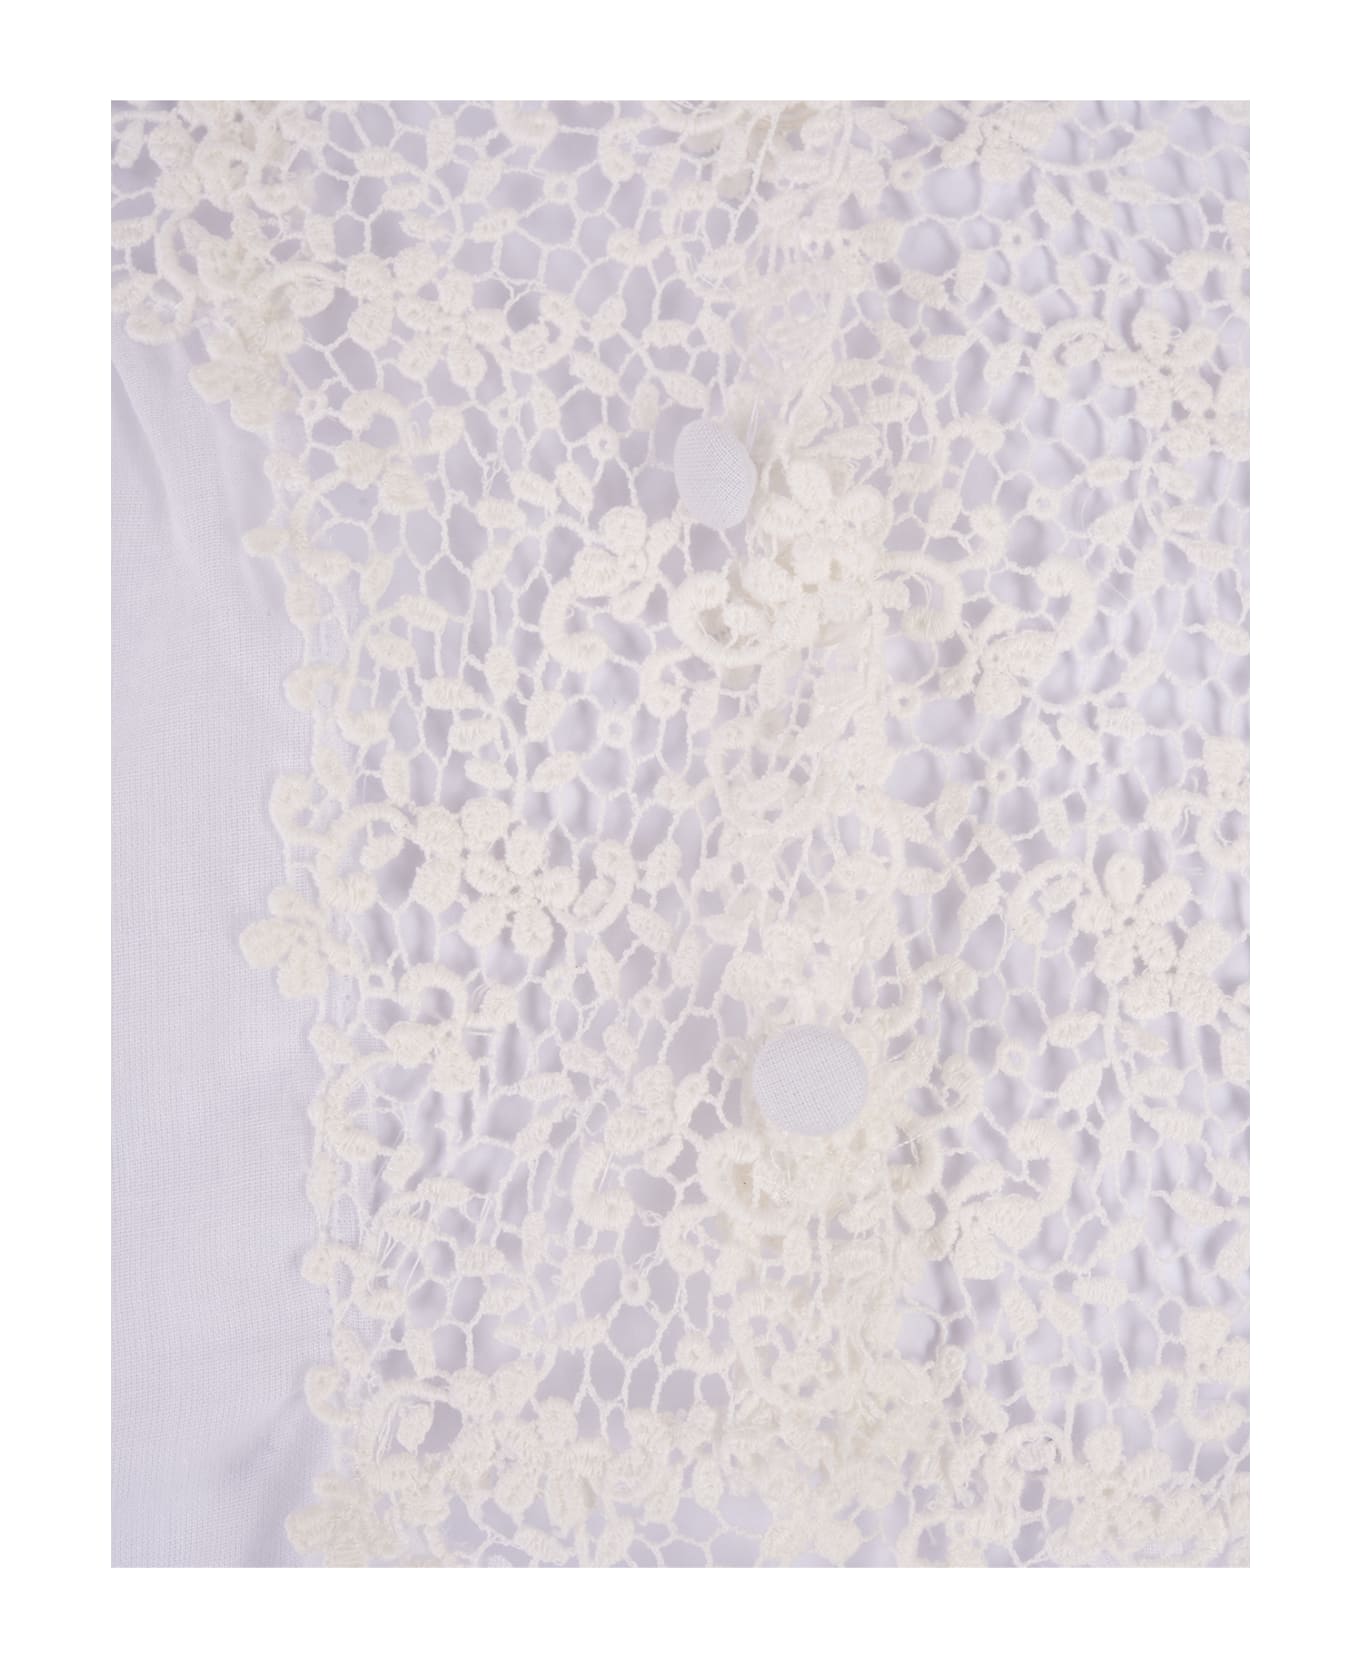 Ermanno Scervino White Blouse With Flower Lace And Cut-out - White